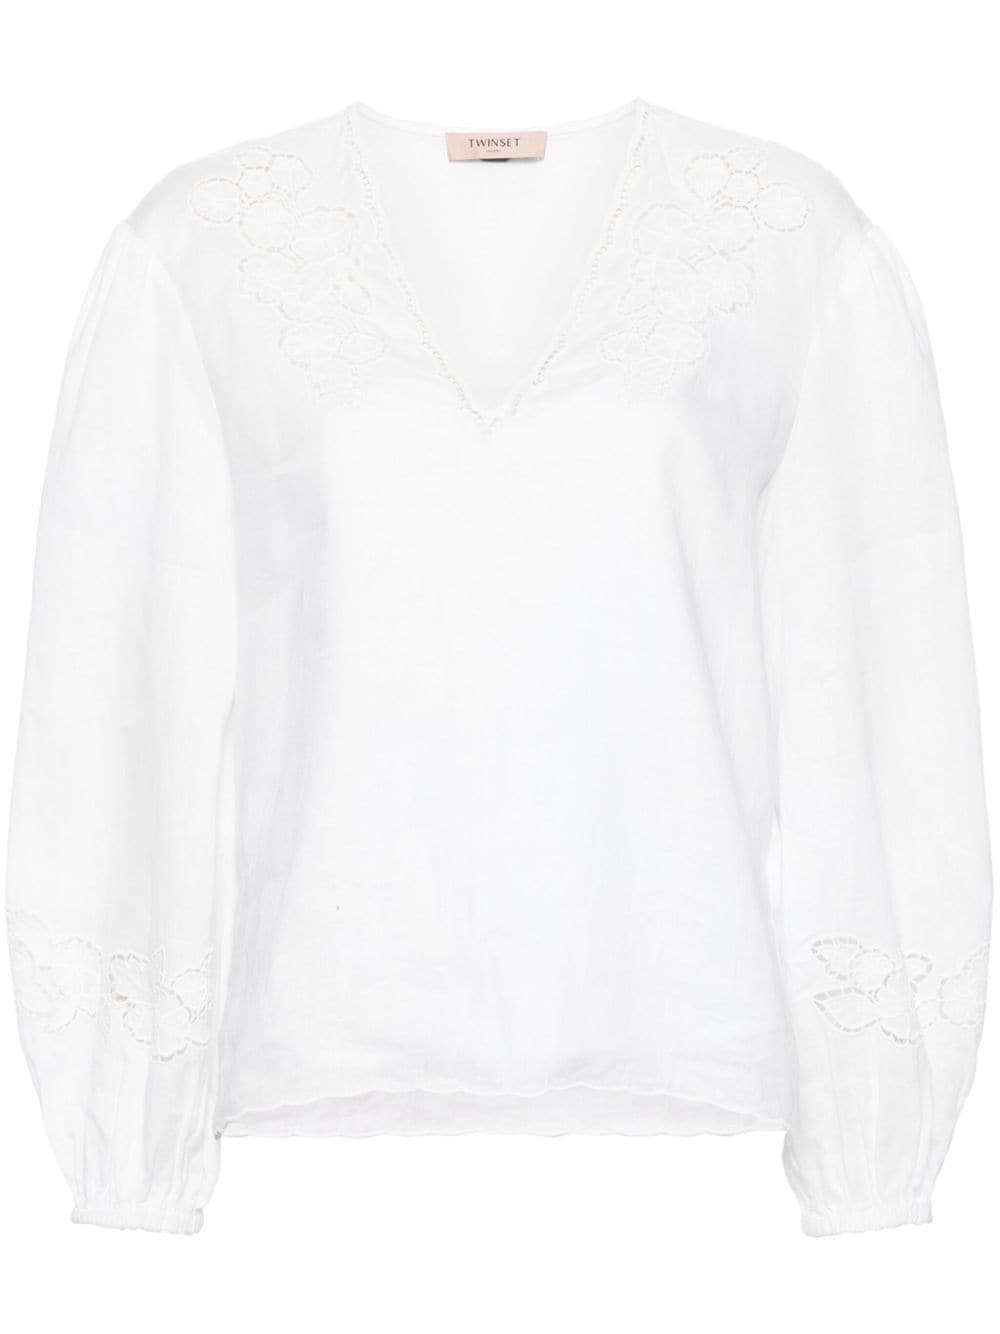 TWINSET floral-embroidered linen blouse - White von TWINSET